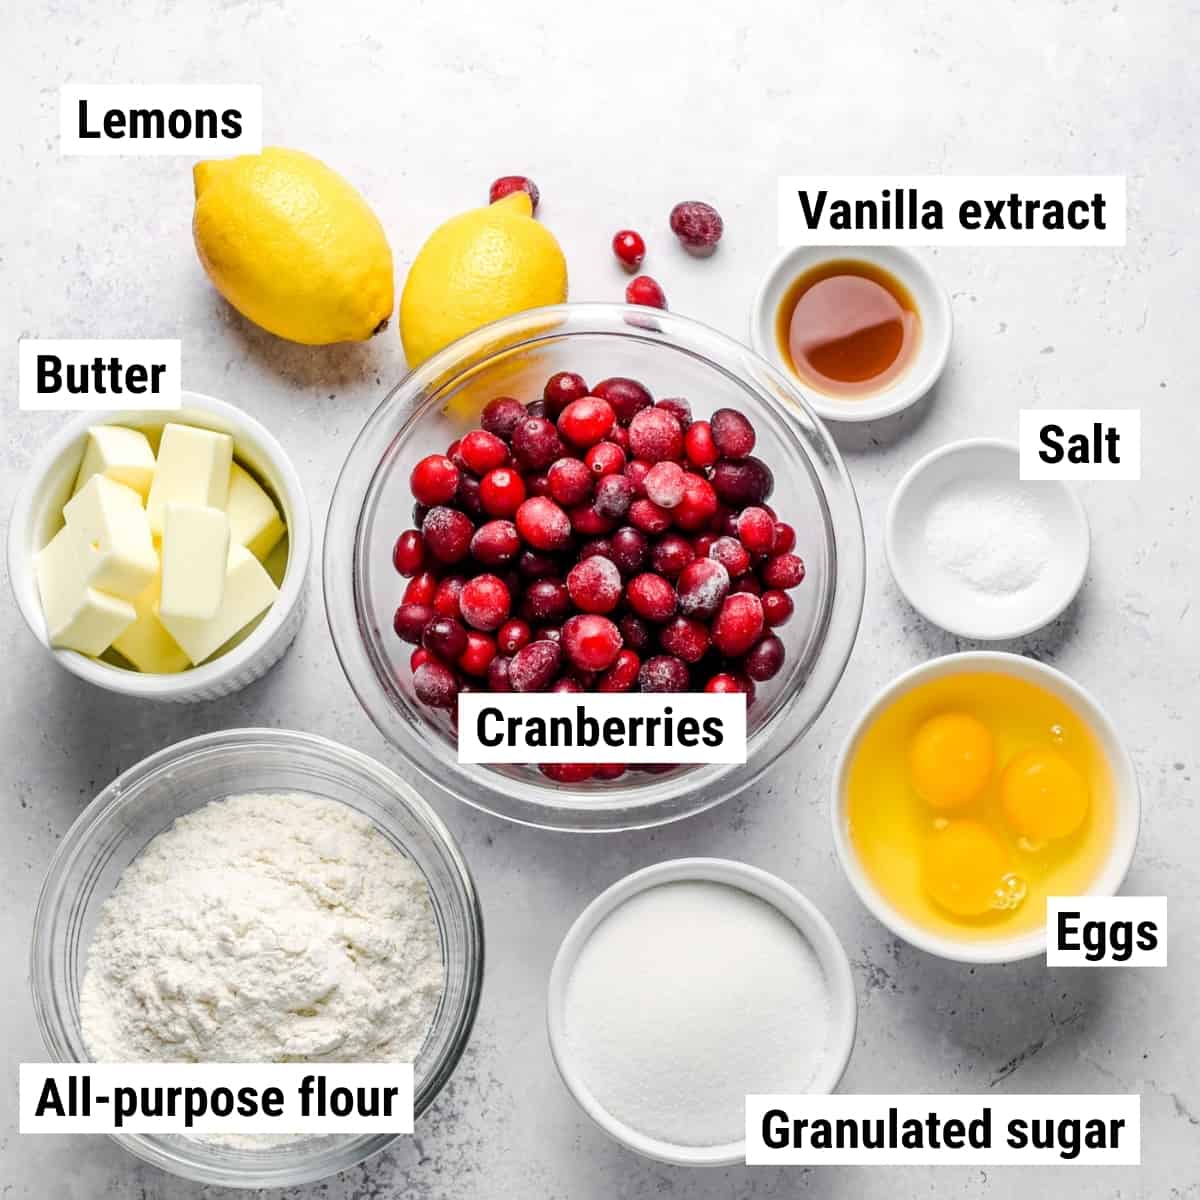 The ingredients used to make lemon cranberry bars laid out on a table.